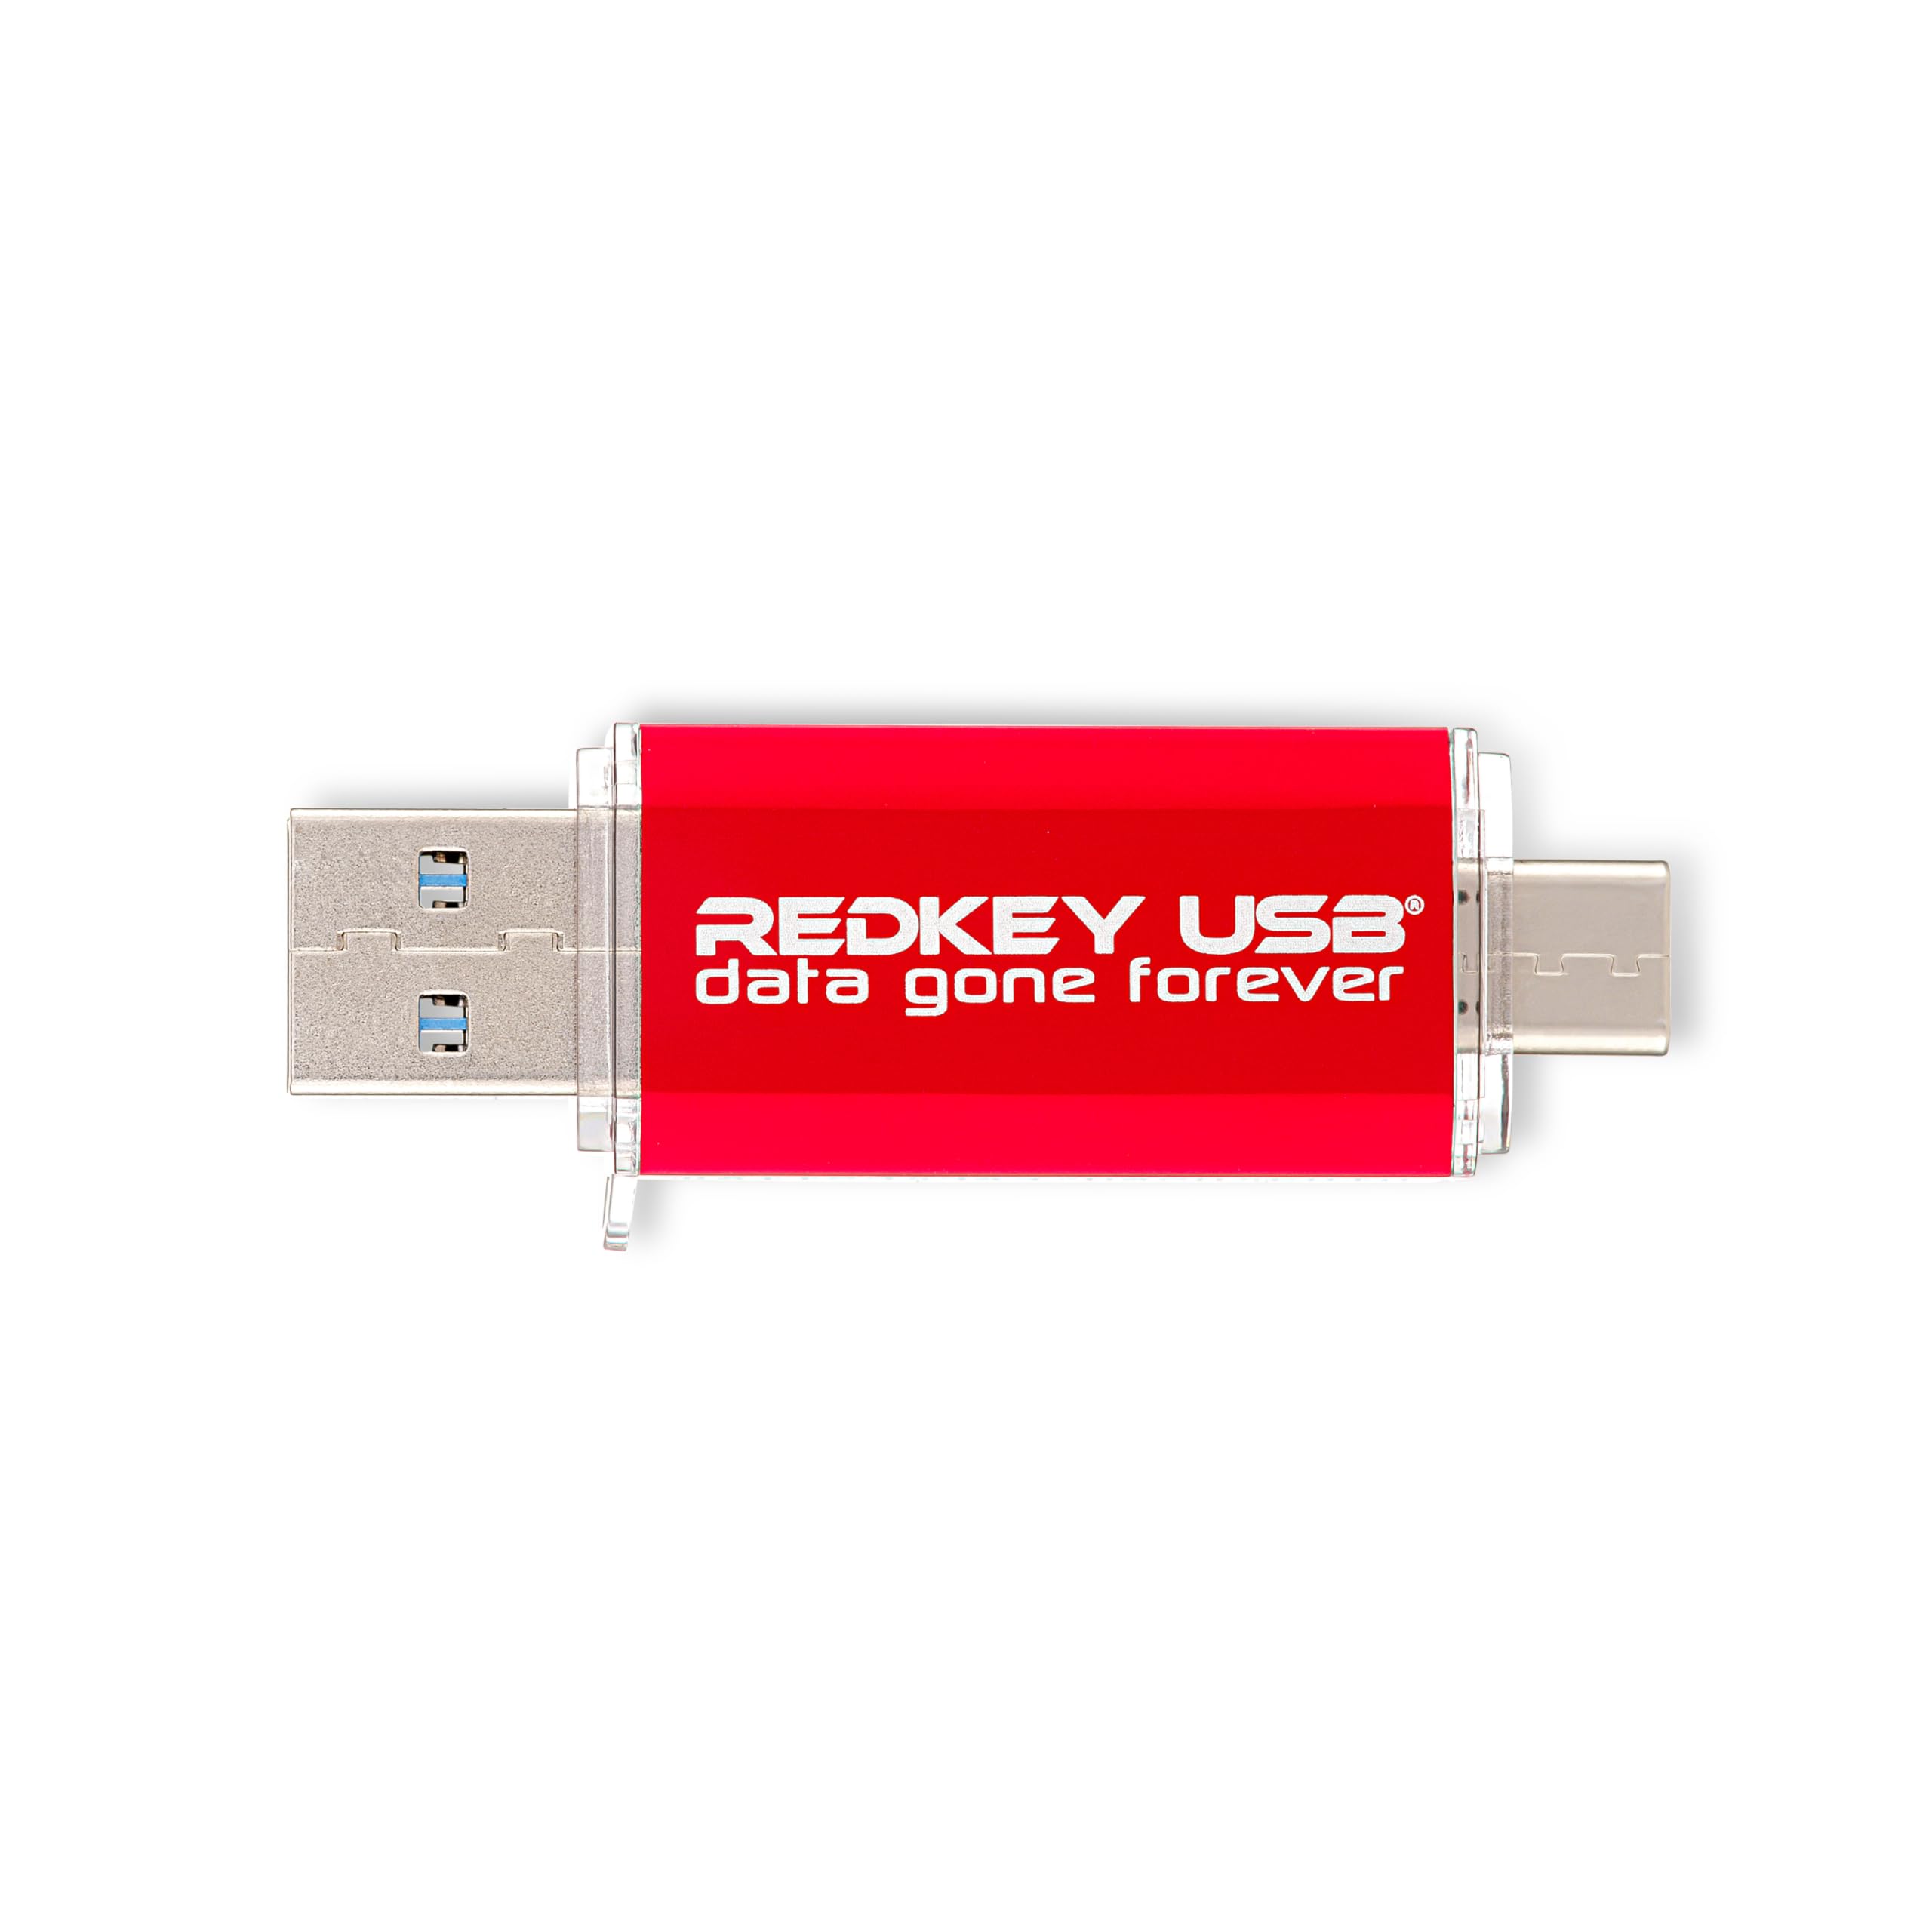 Redkey USB Home: Certified Data Wipe Tool for PCs. Easy-to-Use! Unlimited use & Updates, for Desktop Laptop PC, Mac, SSD, HDD Etc. (Home Edition)